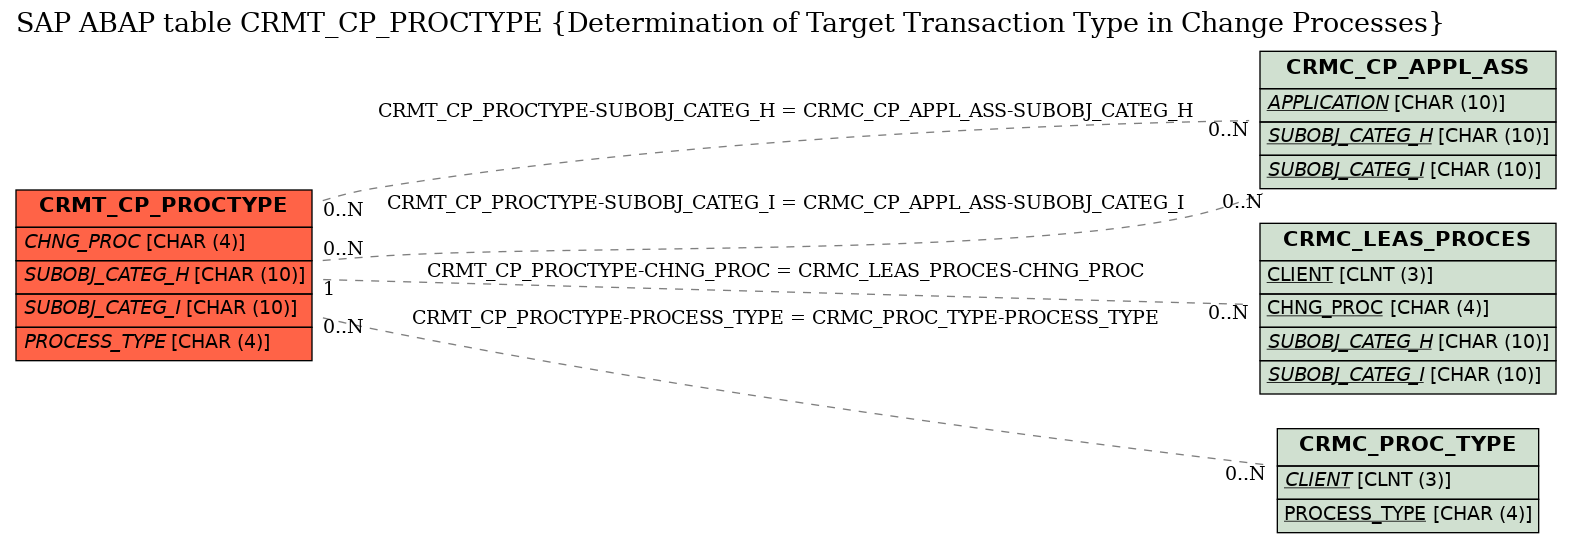 E-R Diagram for table CRMT_CP_PROCTYPE (Determination of Target Transaction Type in Change Processes)